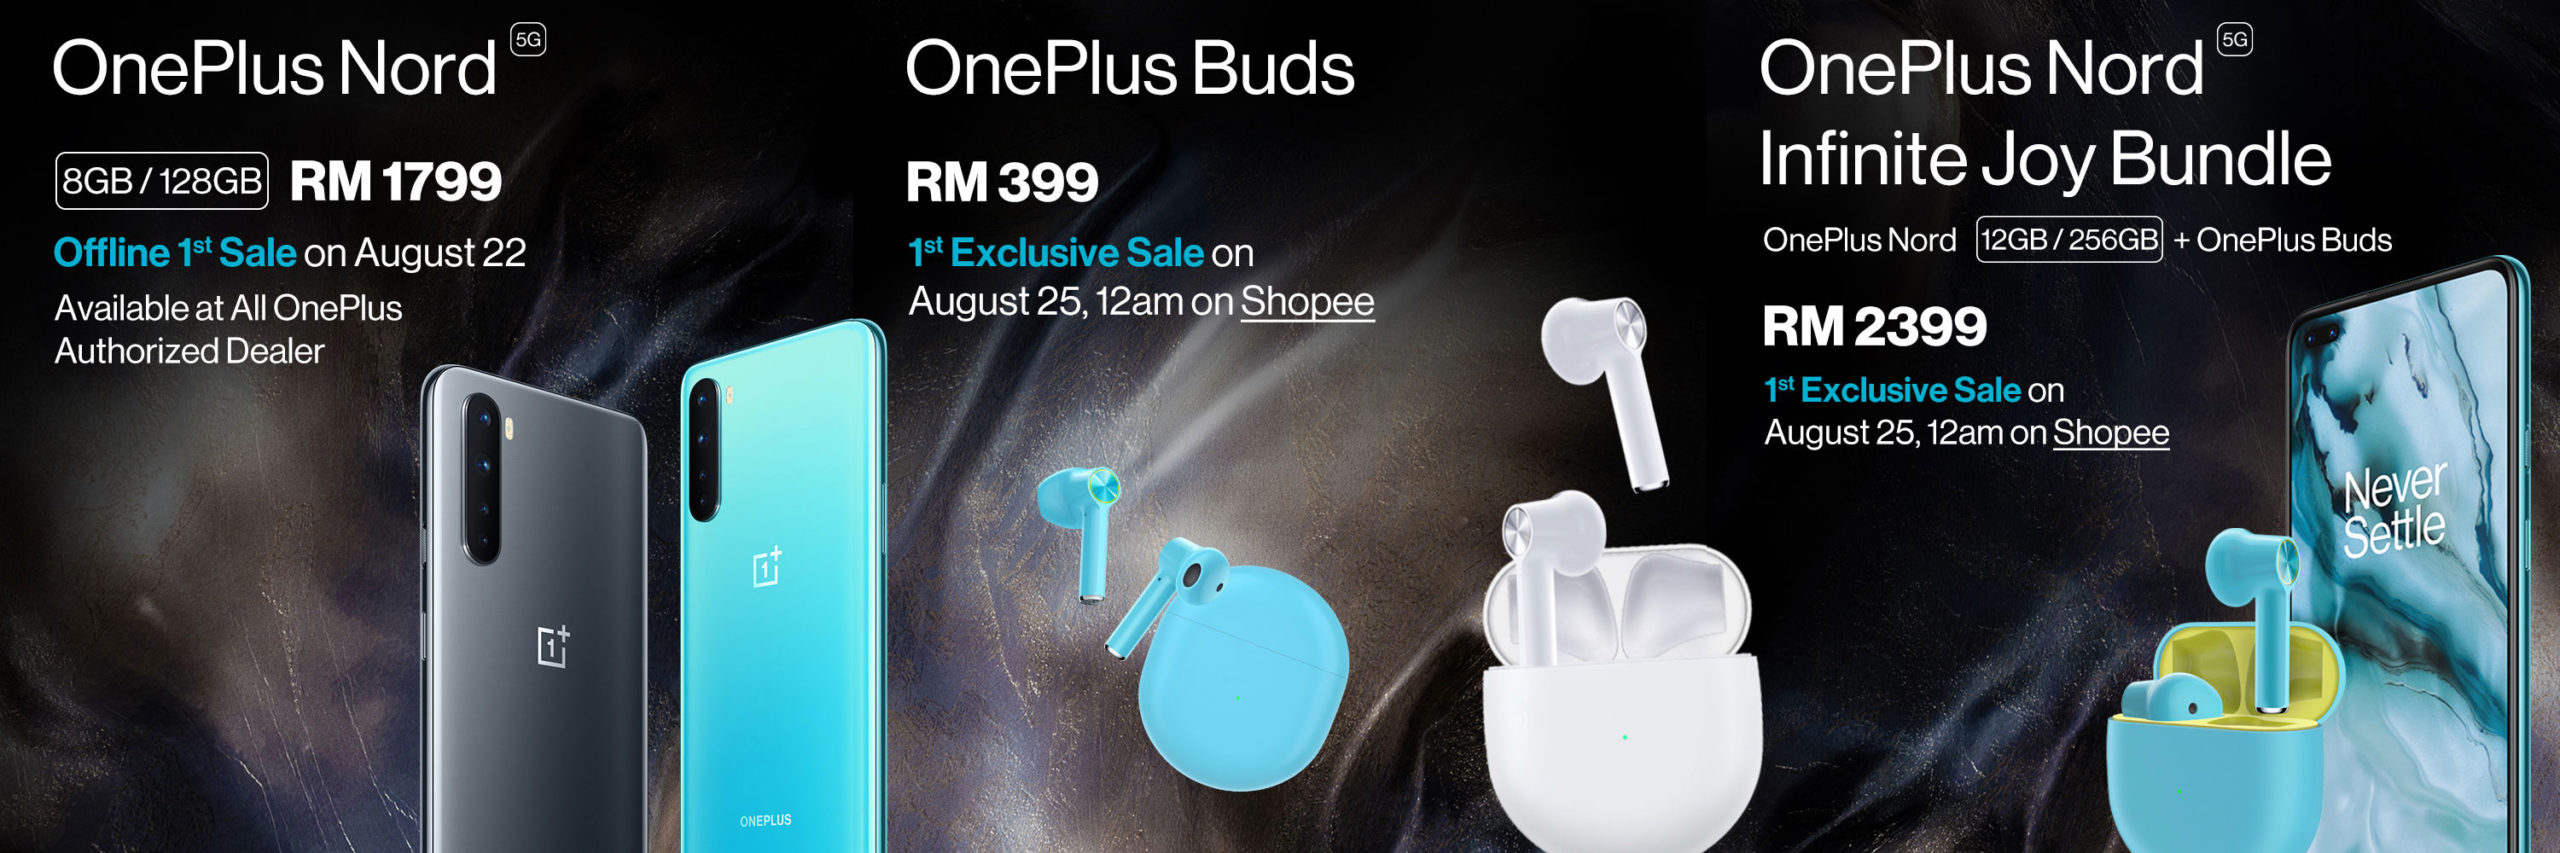 OnePlus Nord and OnePlus Buds Malaysia